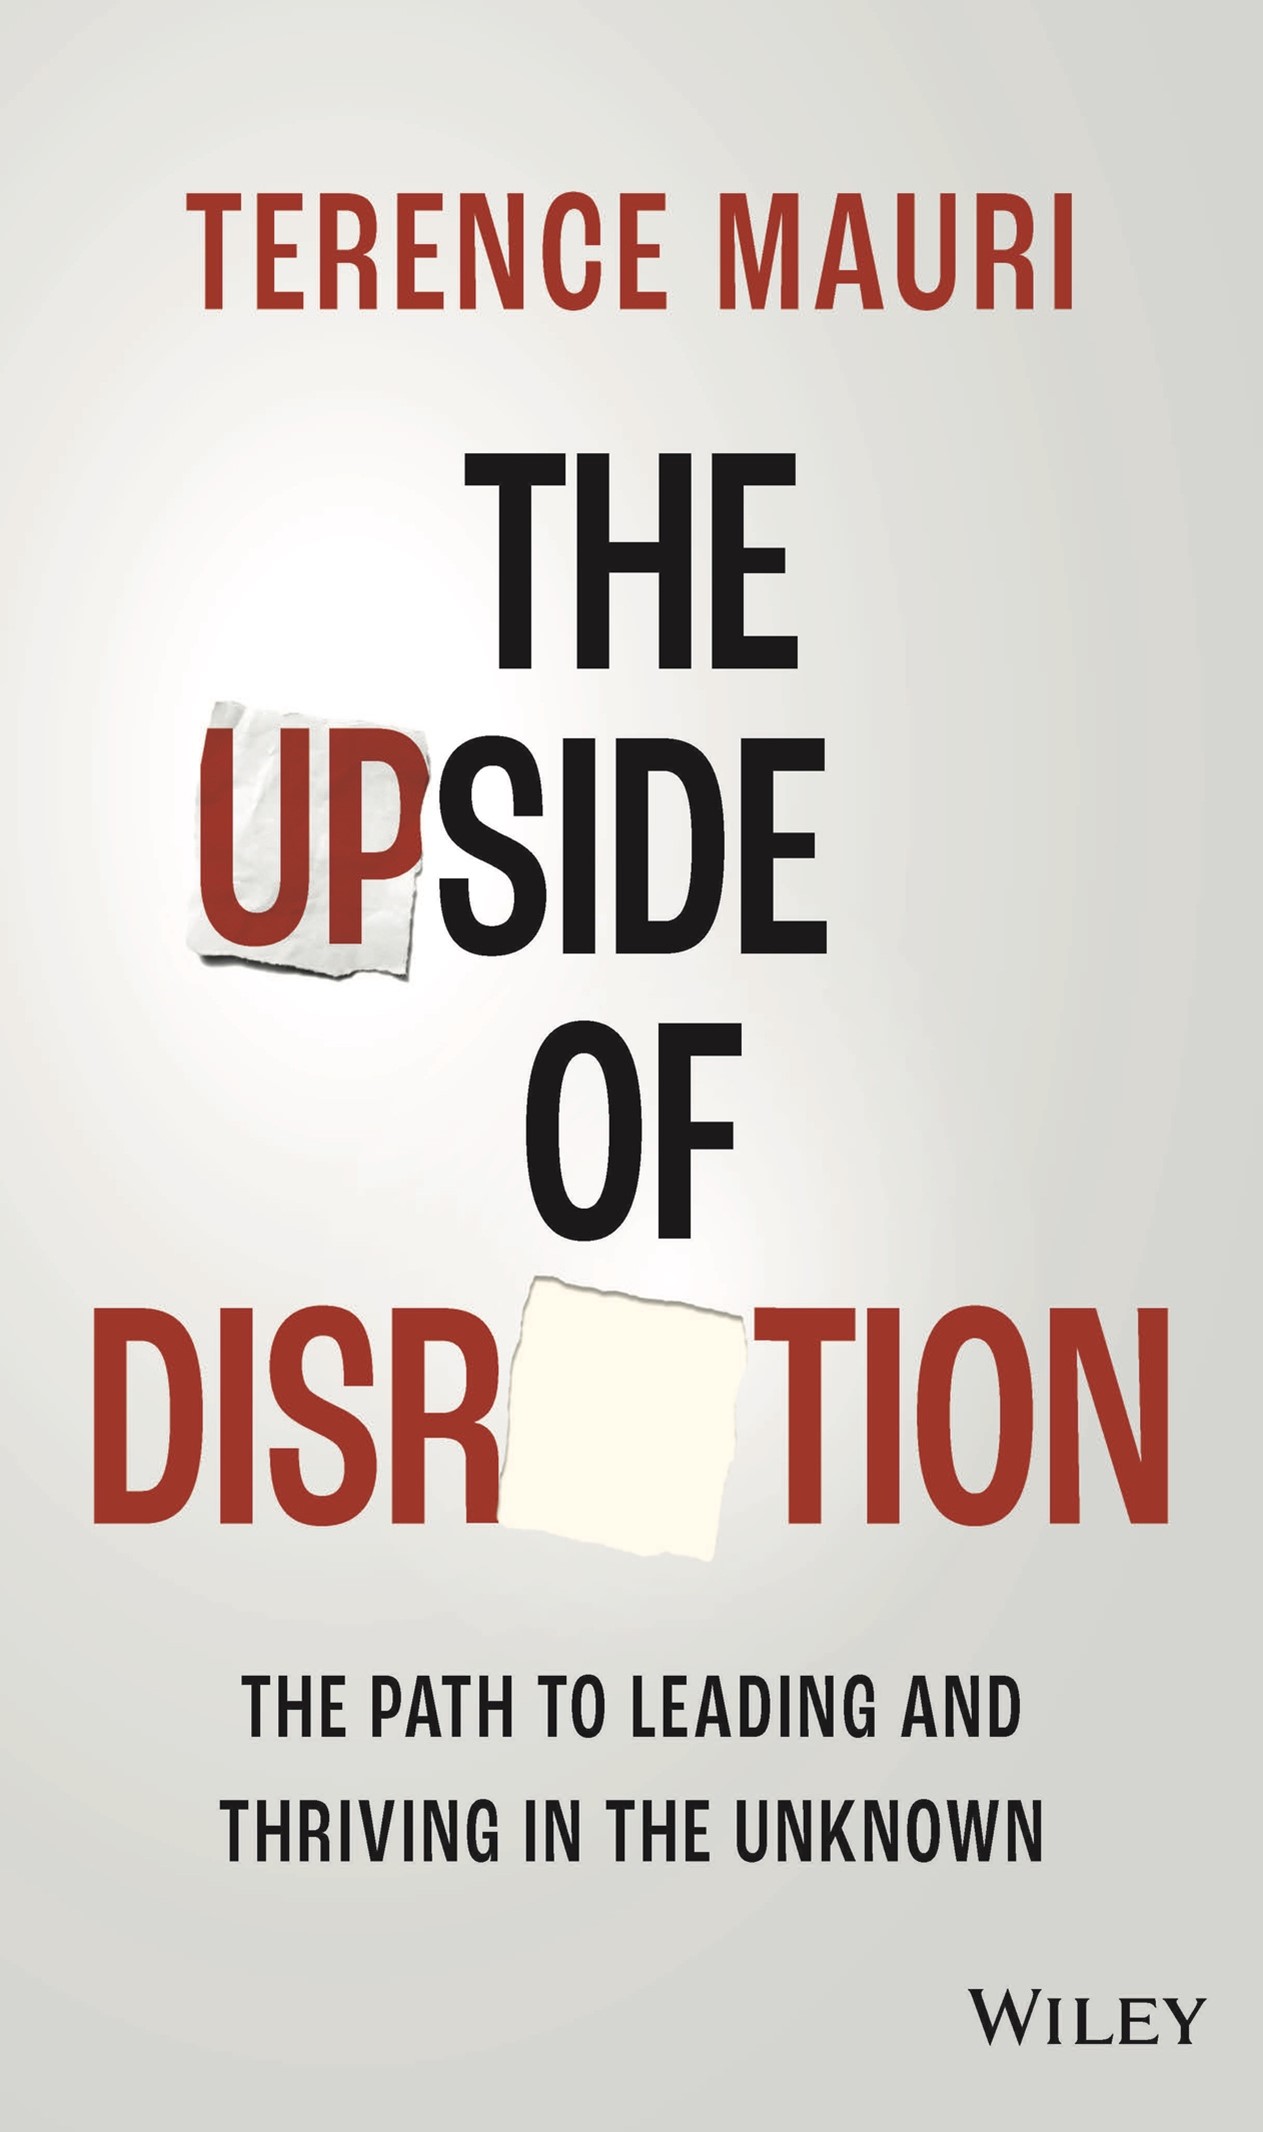 The Upside of Disruption: The Path to Leading & Thriving in the Unknown